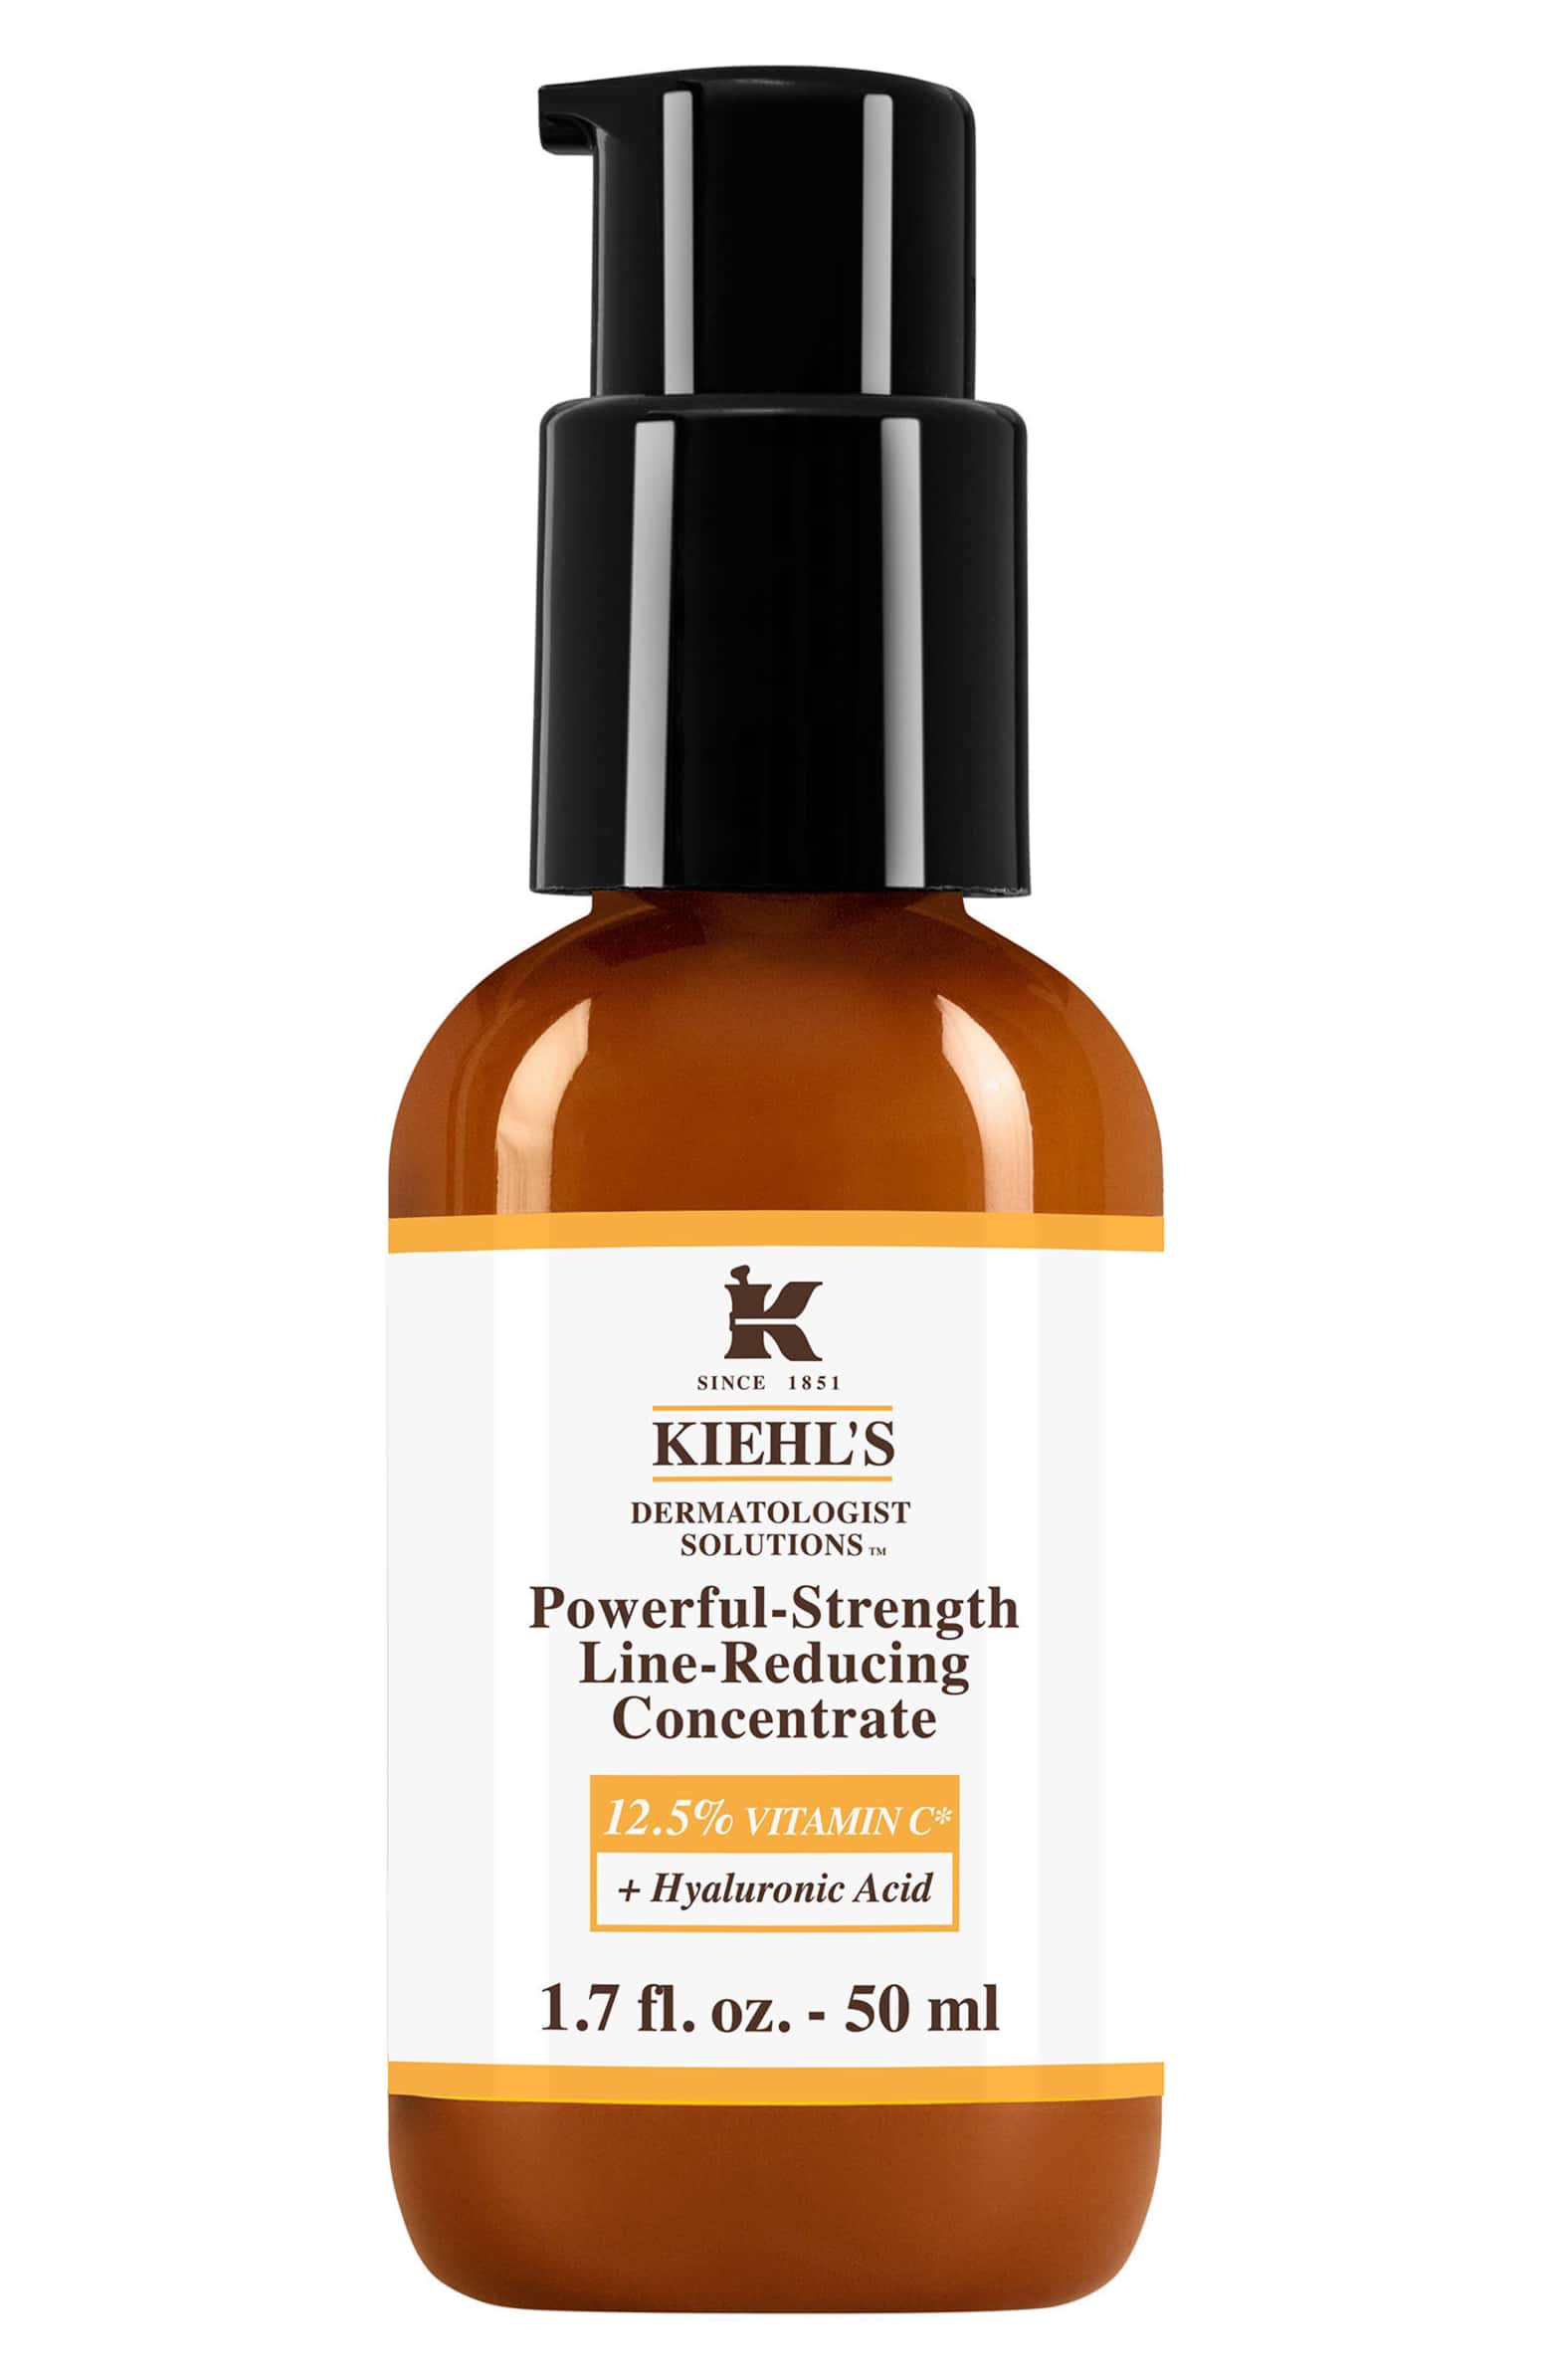 Powerful-Strength Line-Reducing Concentrate